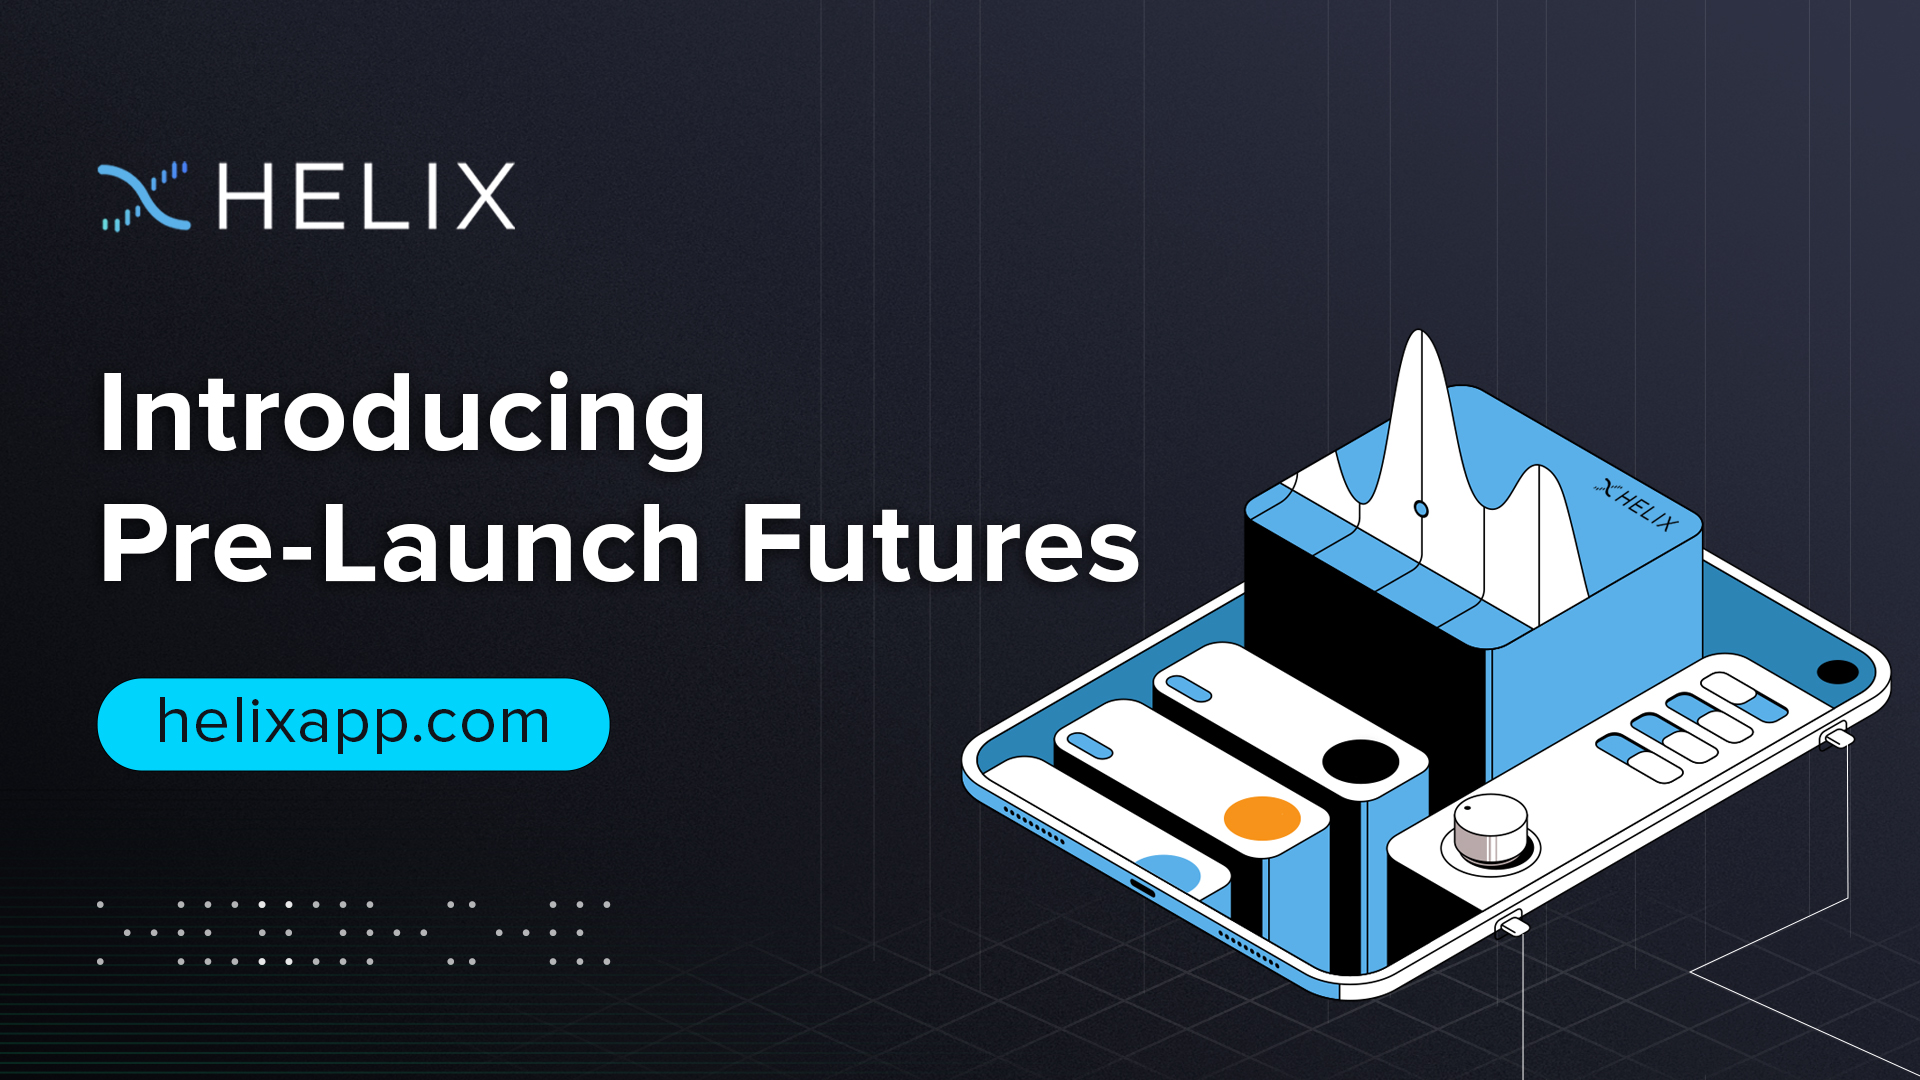 Introducing-Pre-Launch-Futures-1.jpg